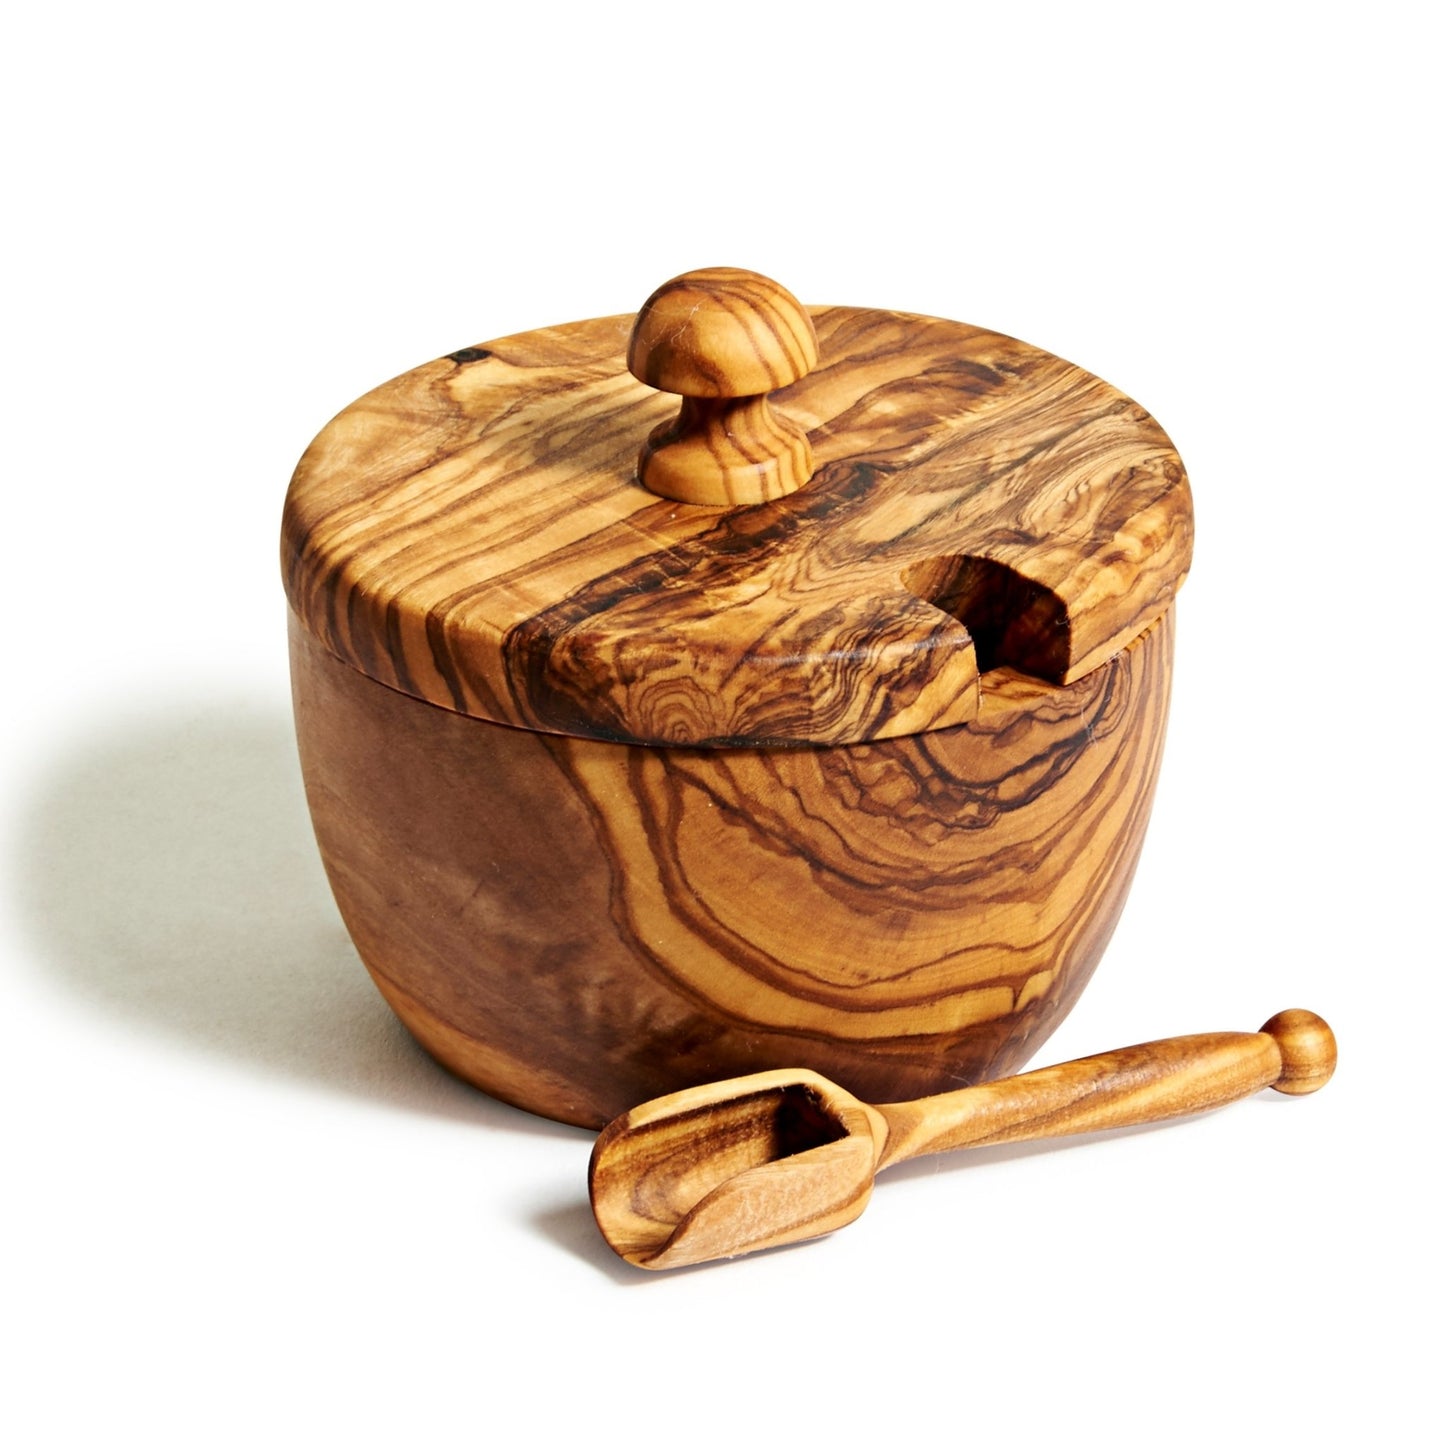 [RESERVED FOR BRITTANY] Olivewood Sugar Bowl with Spoon - Natural Olivewood -Freehand Market